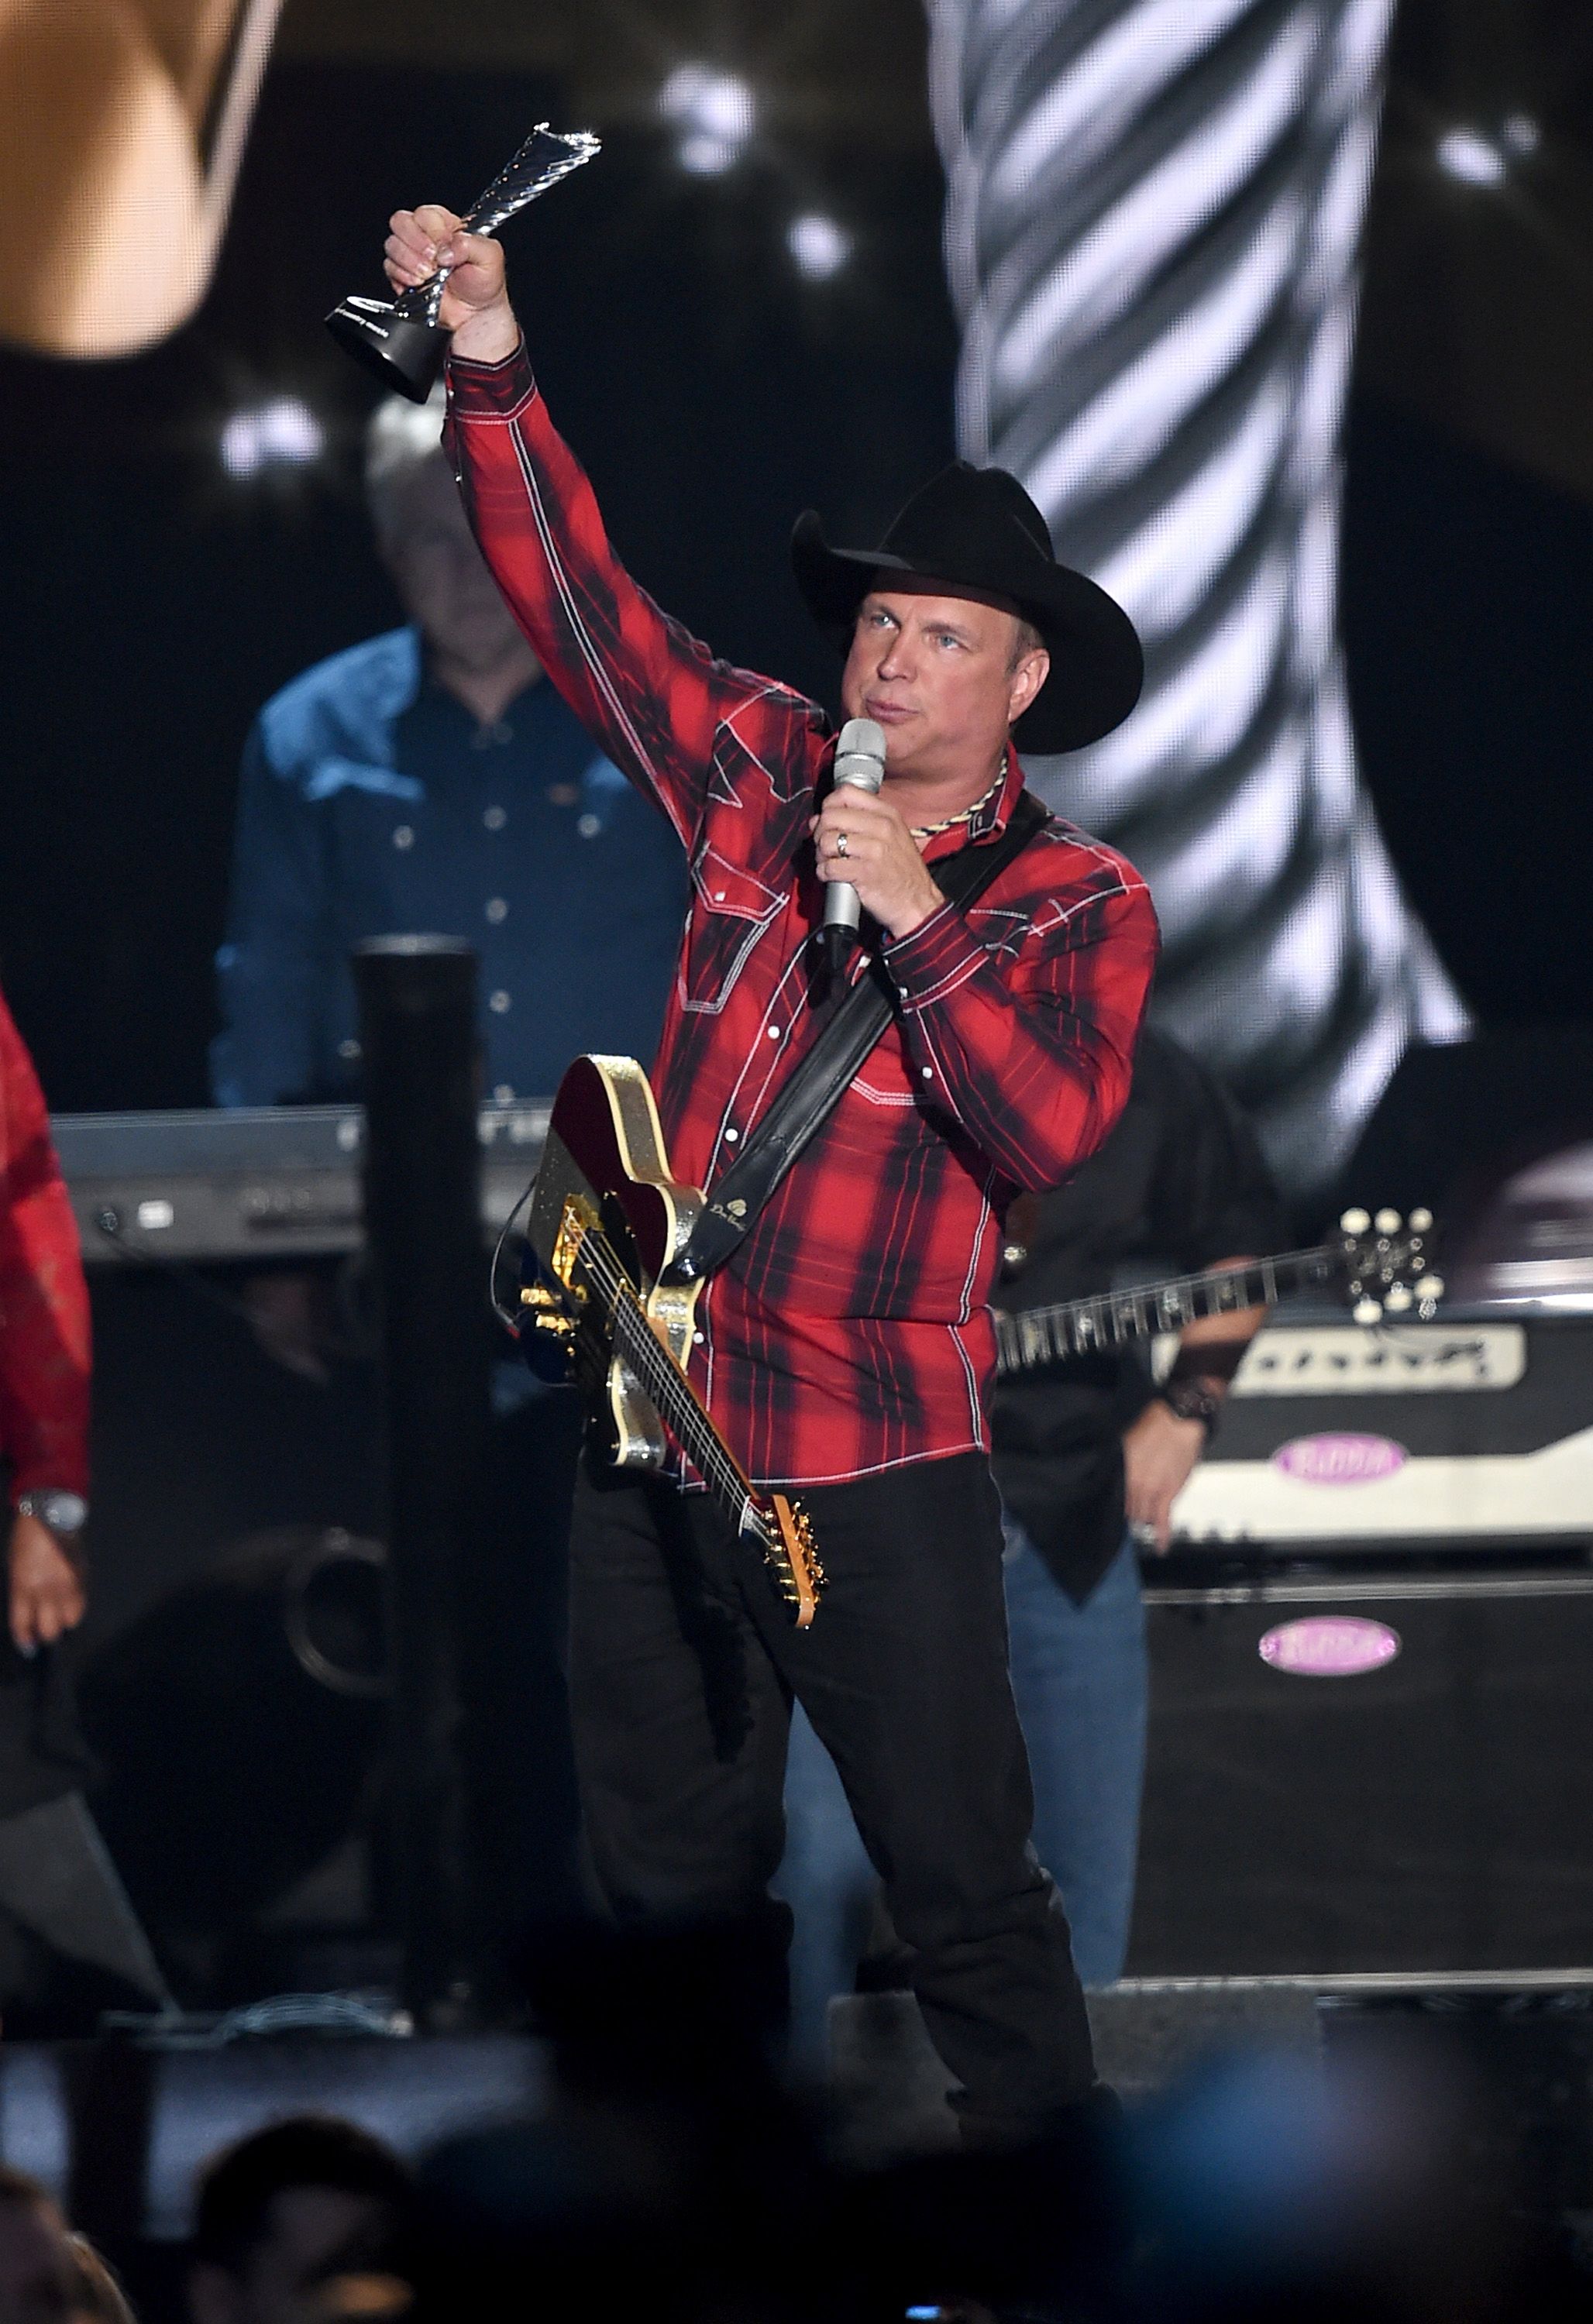 Garth Brooks Shares 'Baby, Let's Lay Down and Dance' [LISTEN]